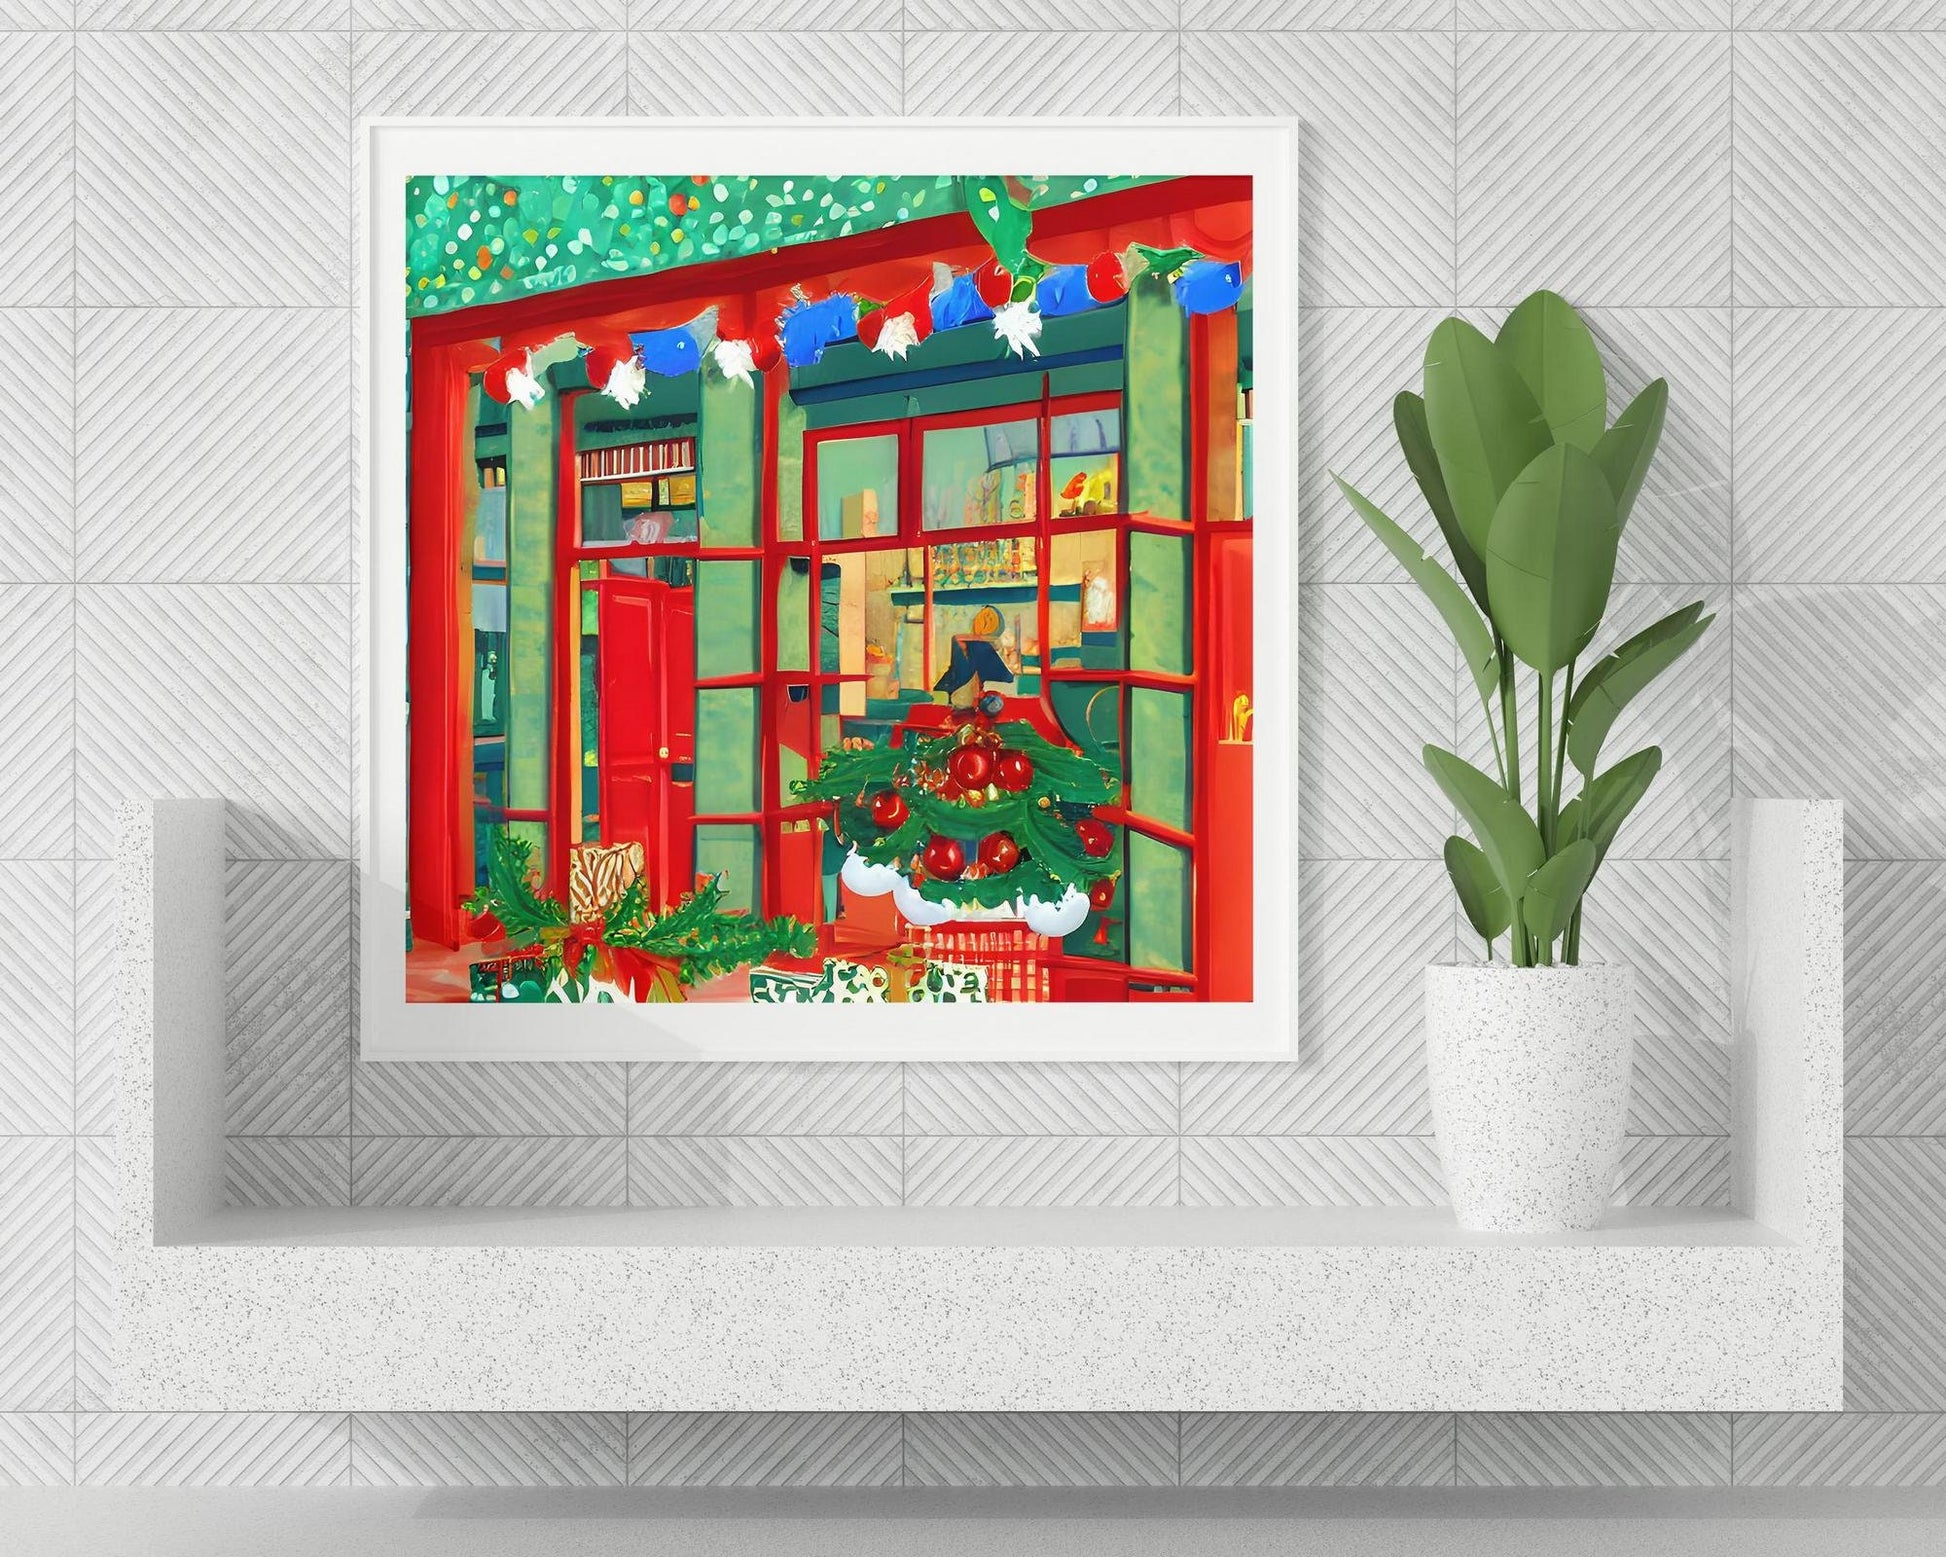 Window Of A Street Shop Decorated For Christmas Canvas Print, Canvas Art, Abstract Print, Contemporary Art, Bedroom Decor, Framed Canvas